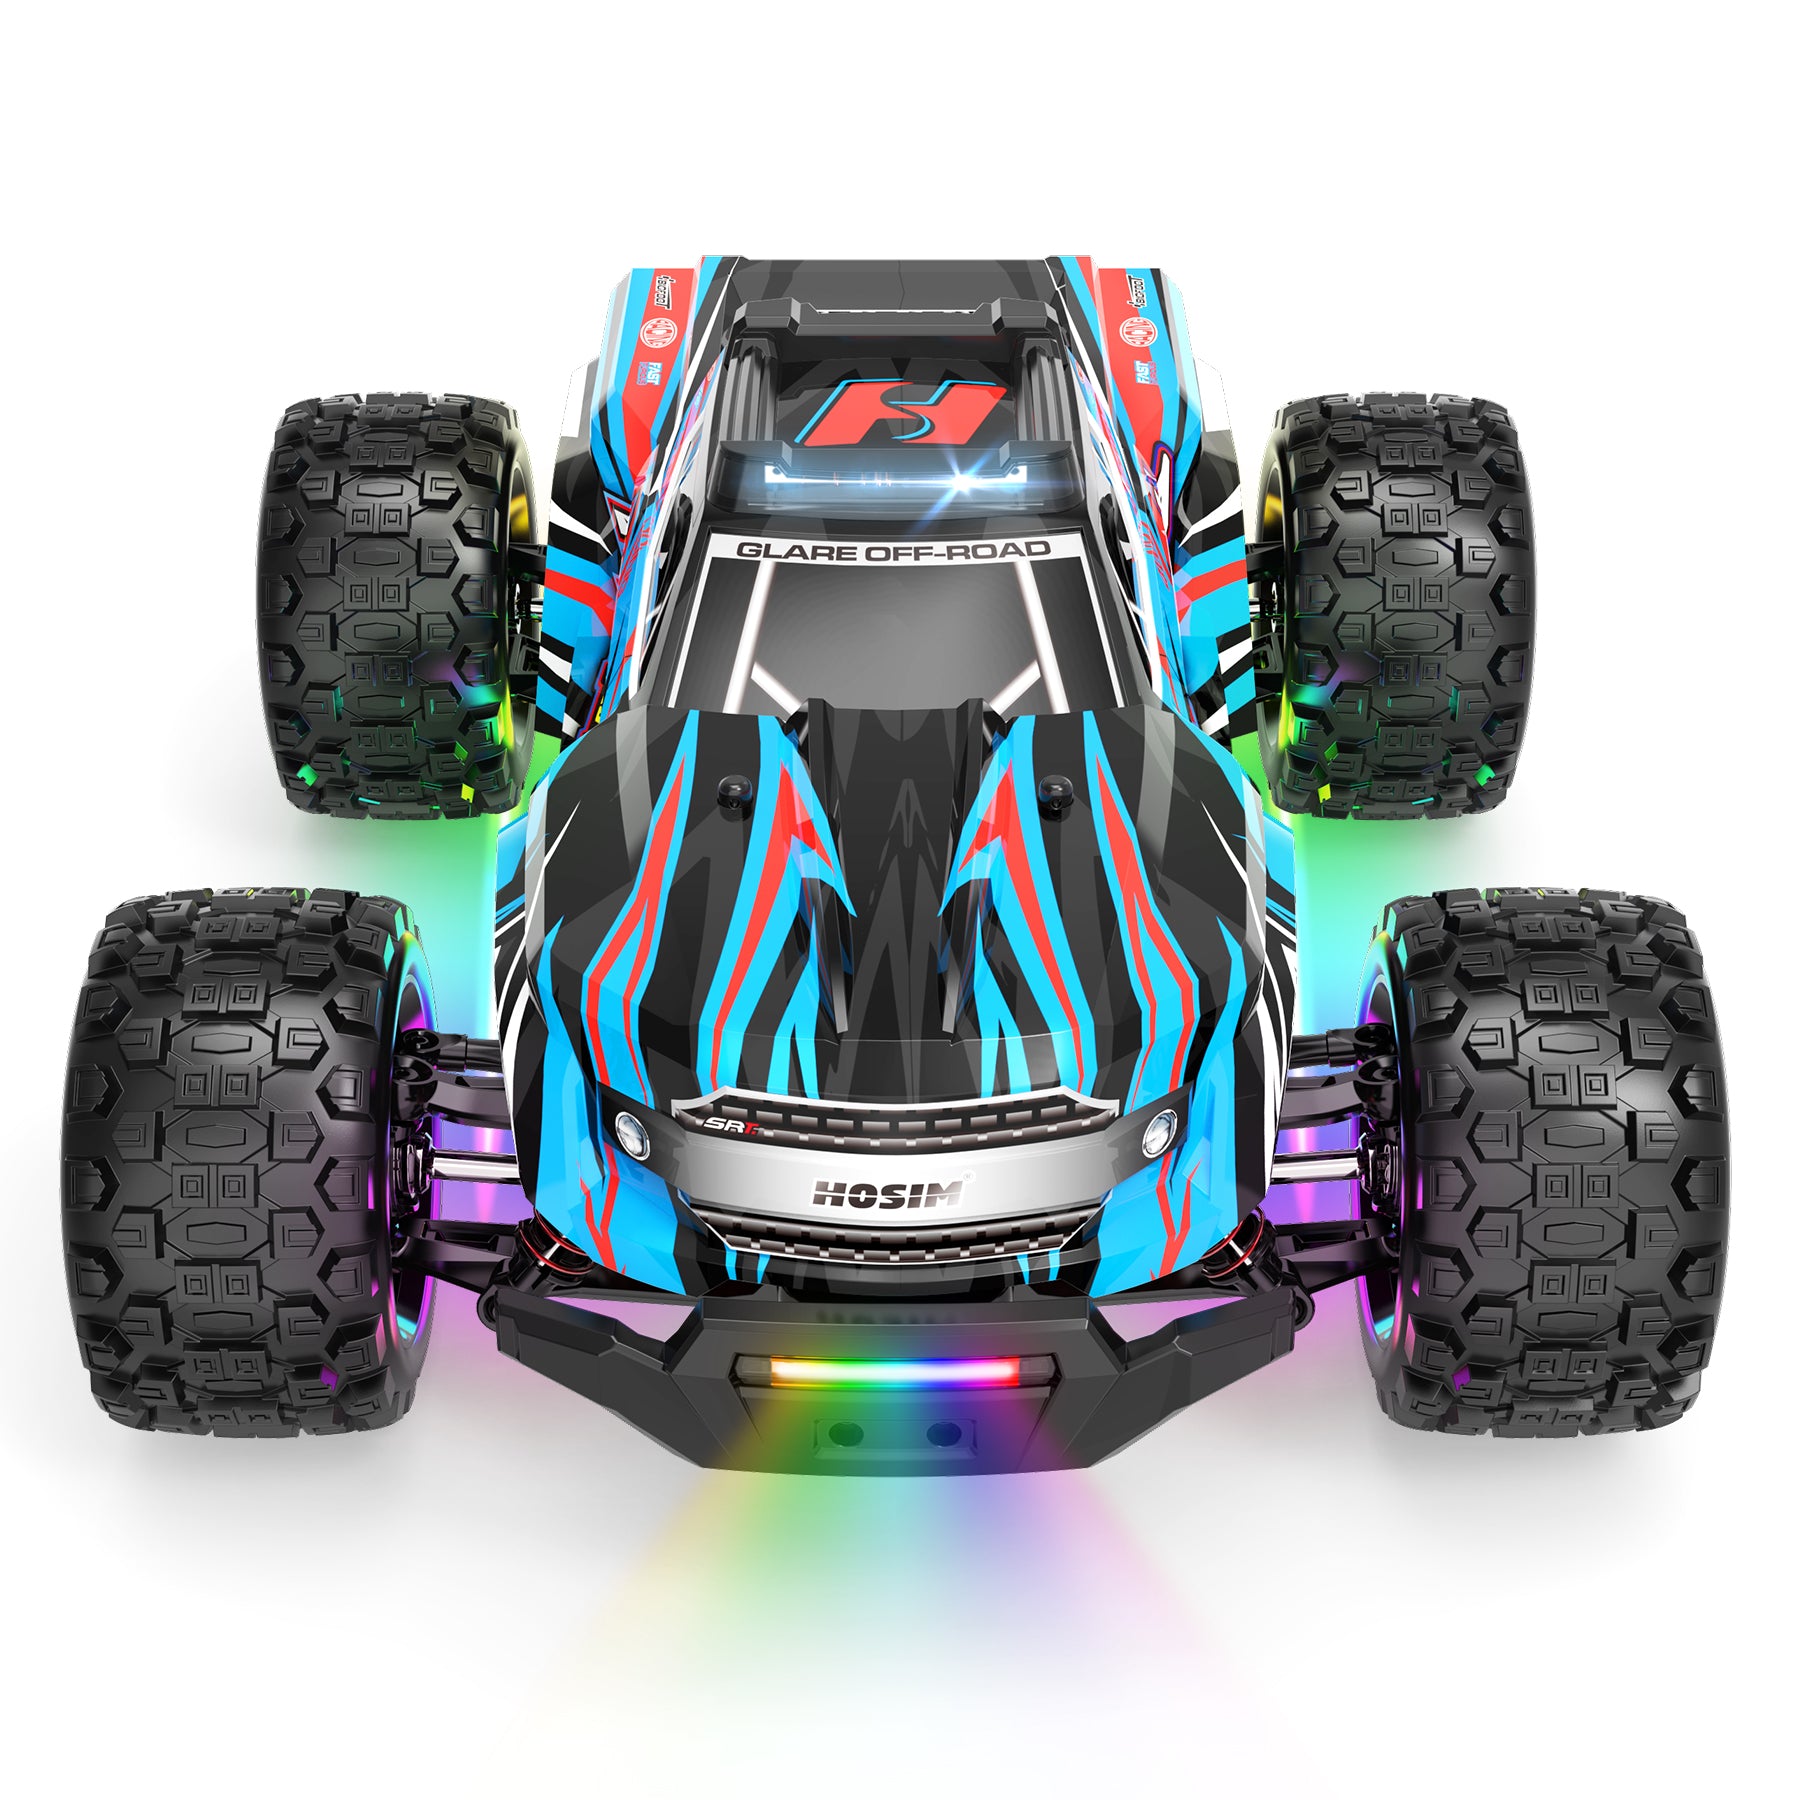 Hosim 1:14 Remote Control Car with Lights RC Monster Truck Drift Racing Car High Speed 40+KPH Hobby Toy for Adults & Kids